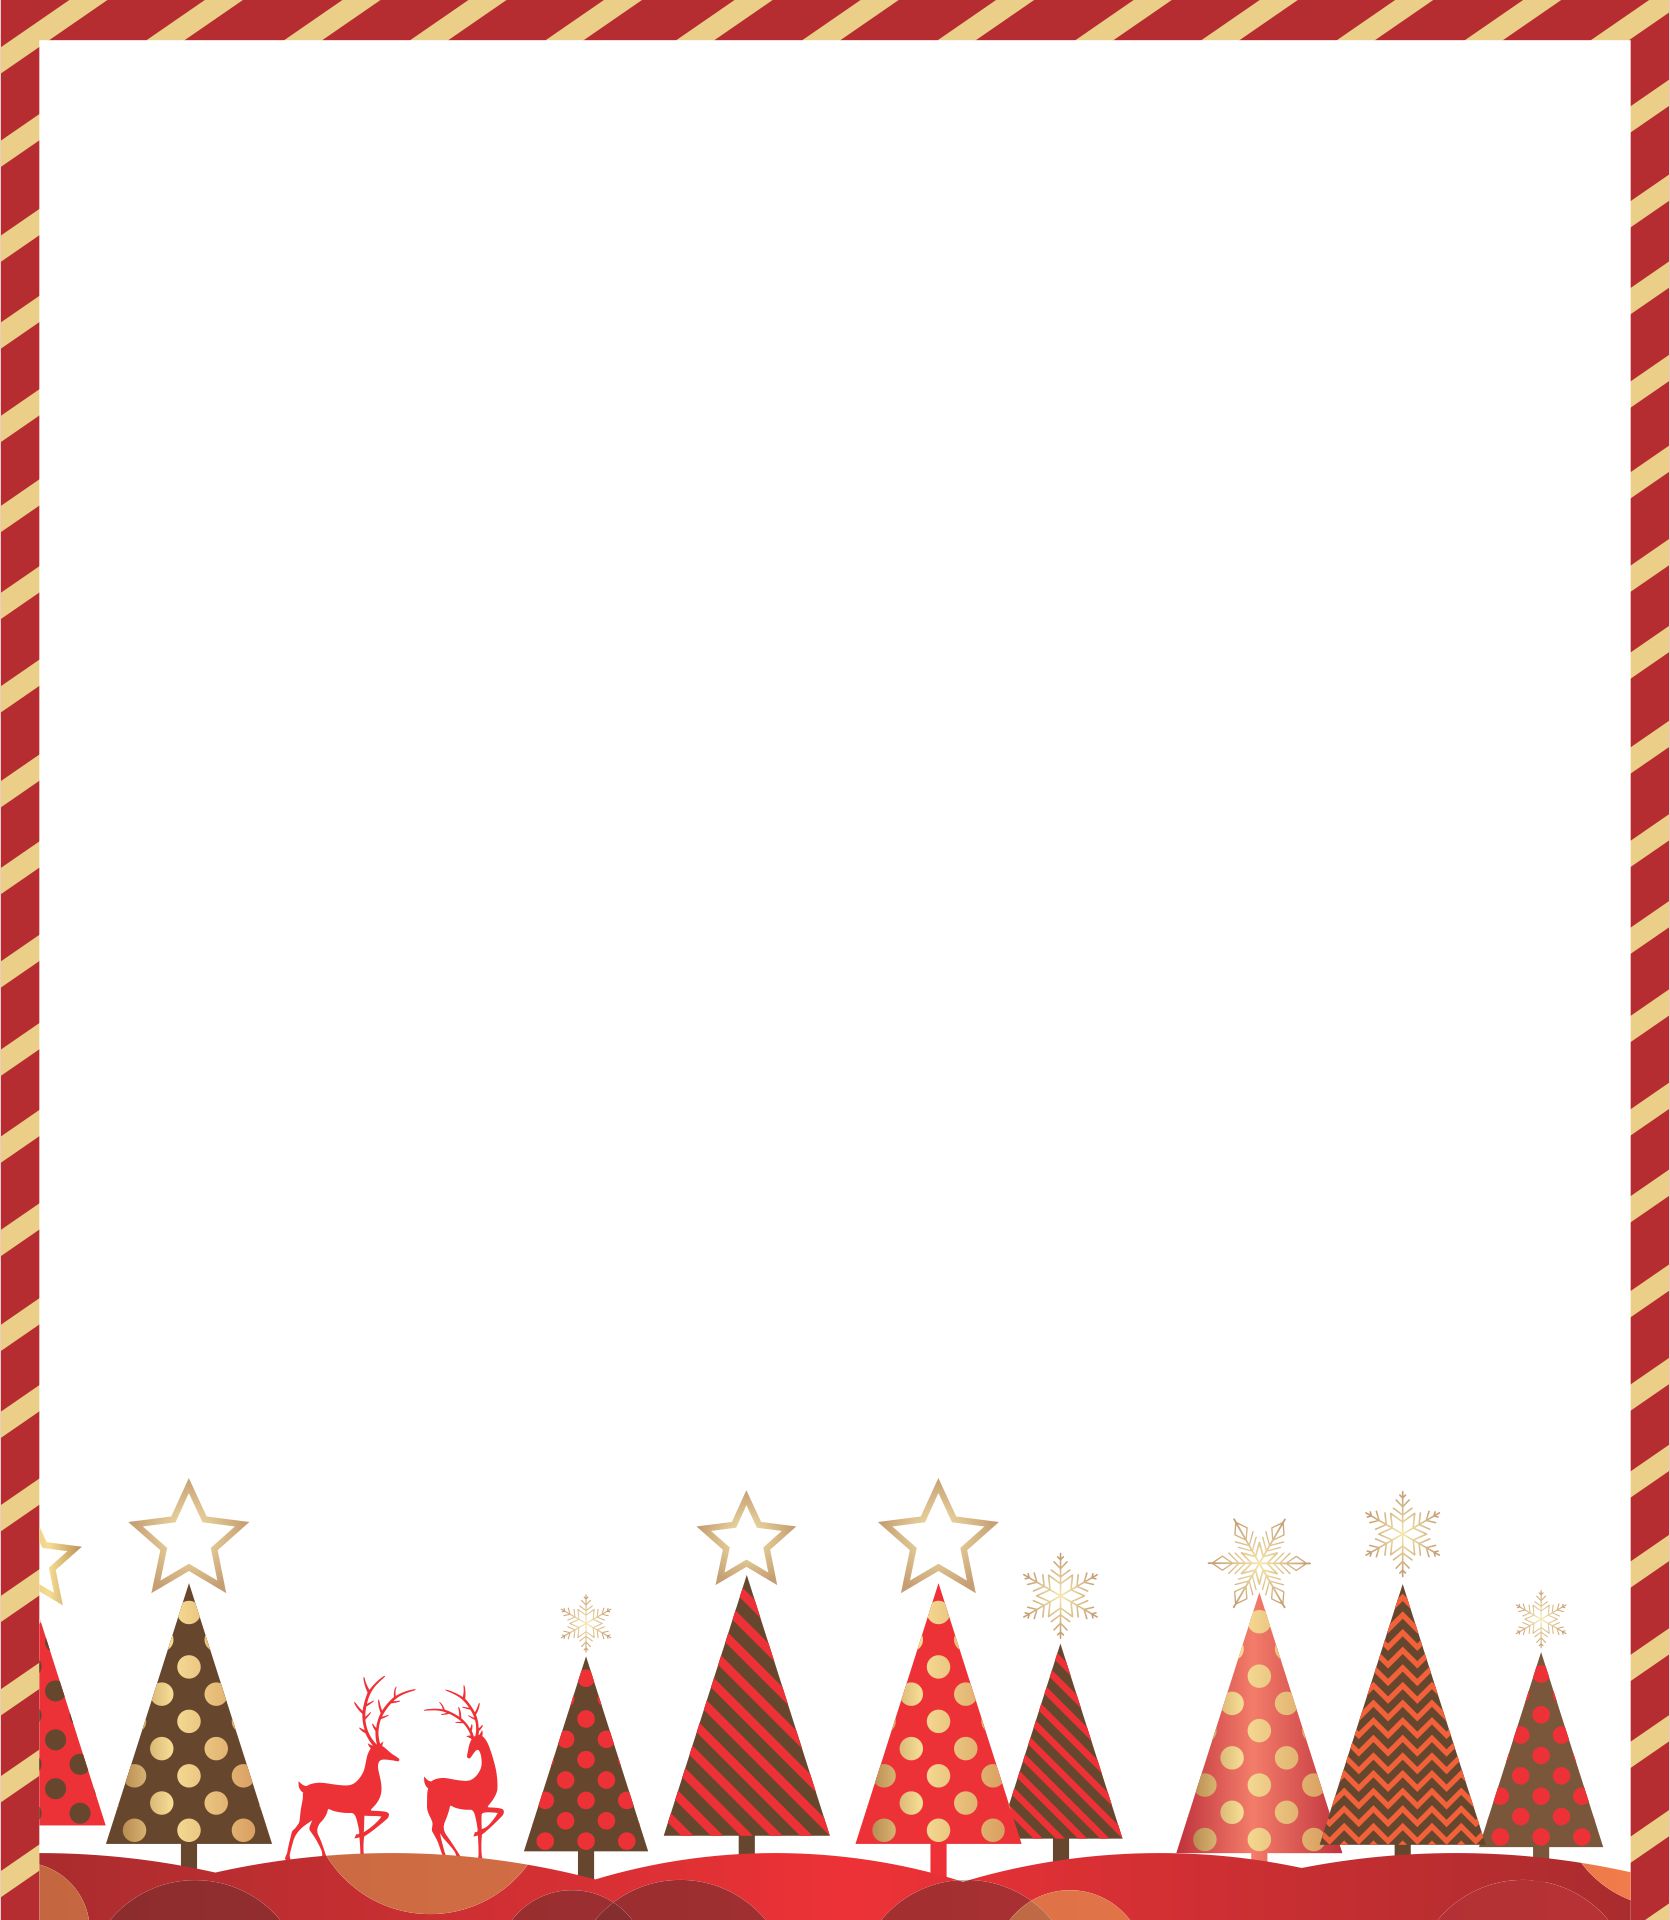 22 Best Free Printable Christmas Borders For Flyers - printablee.com Throughout Christmas Border Word Template